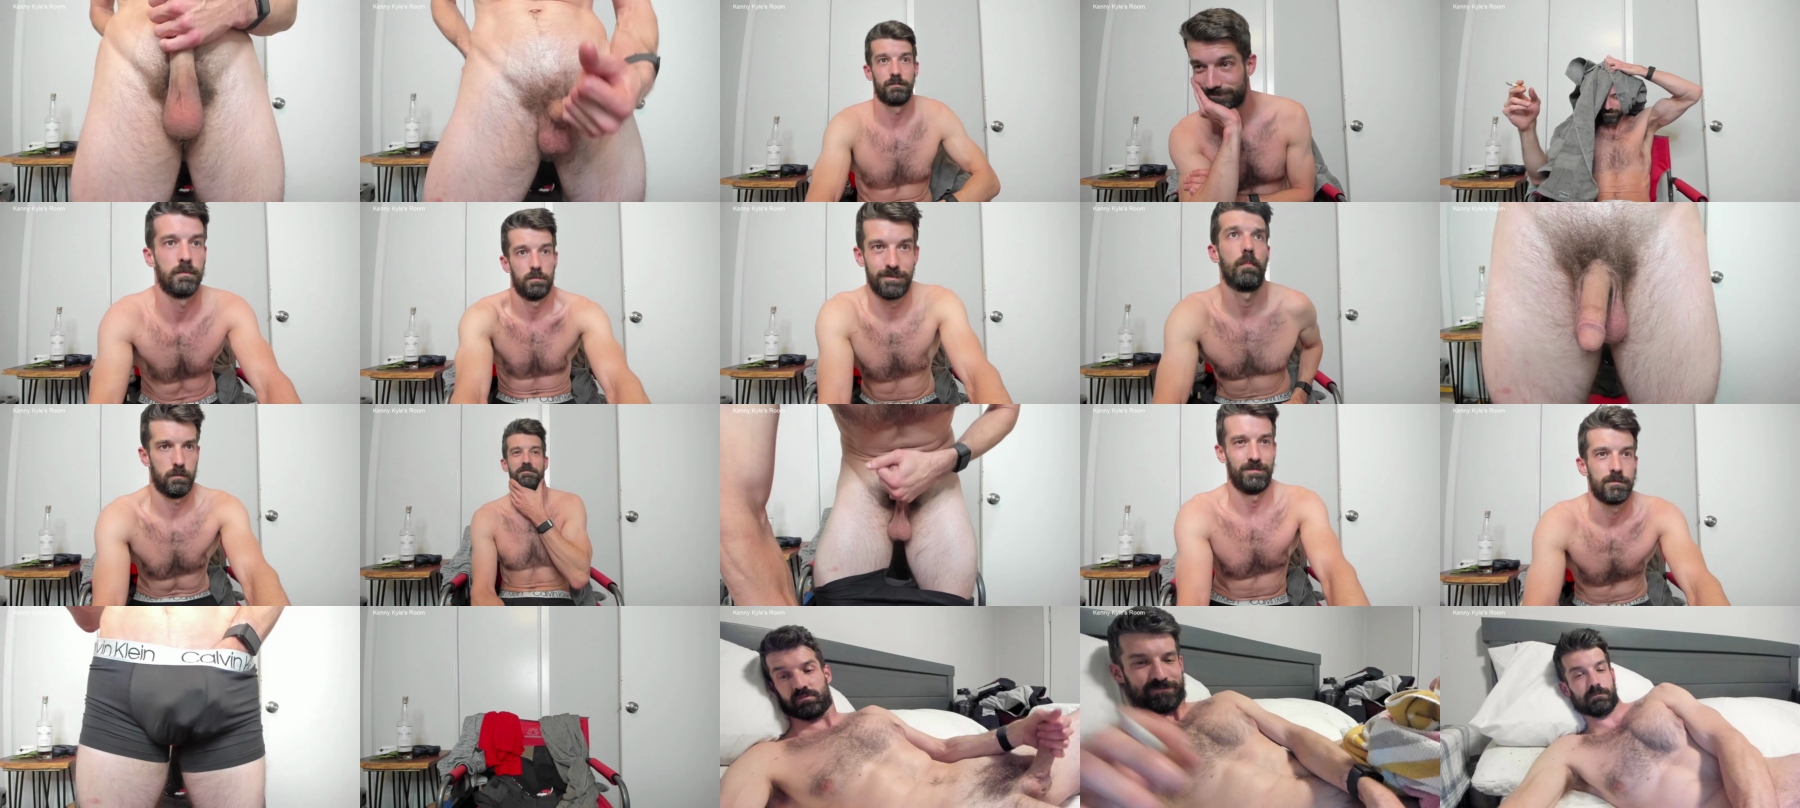 Kennykyle  24-11-2021 Male Topless